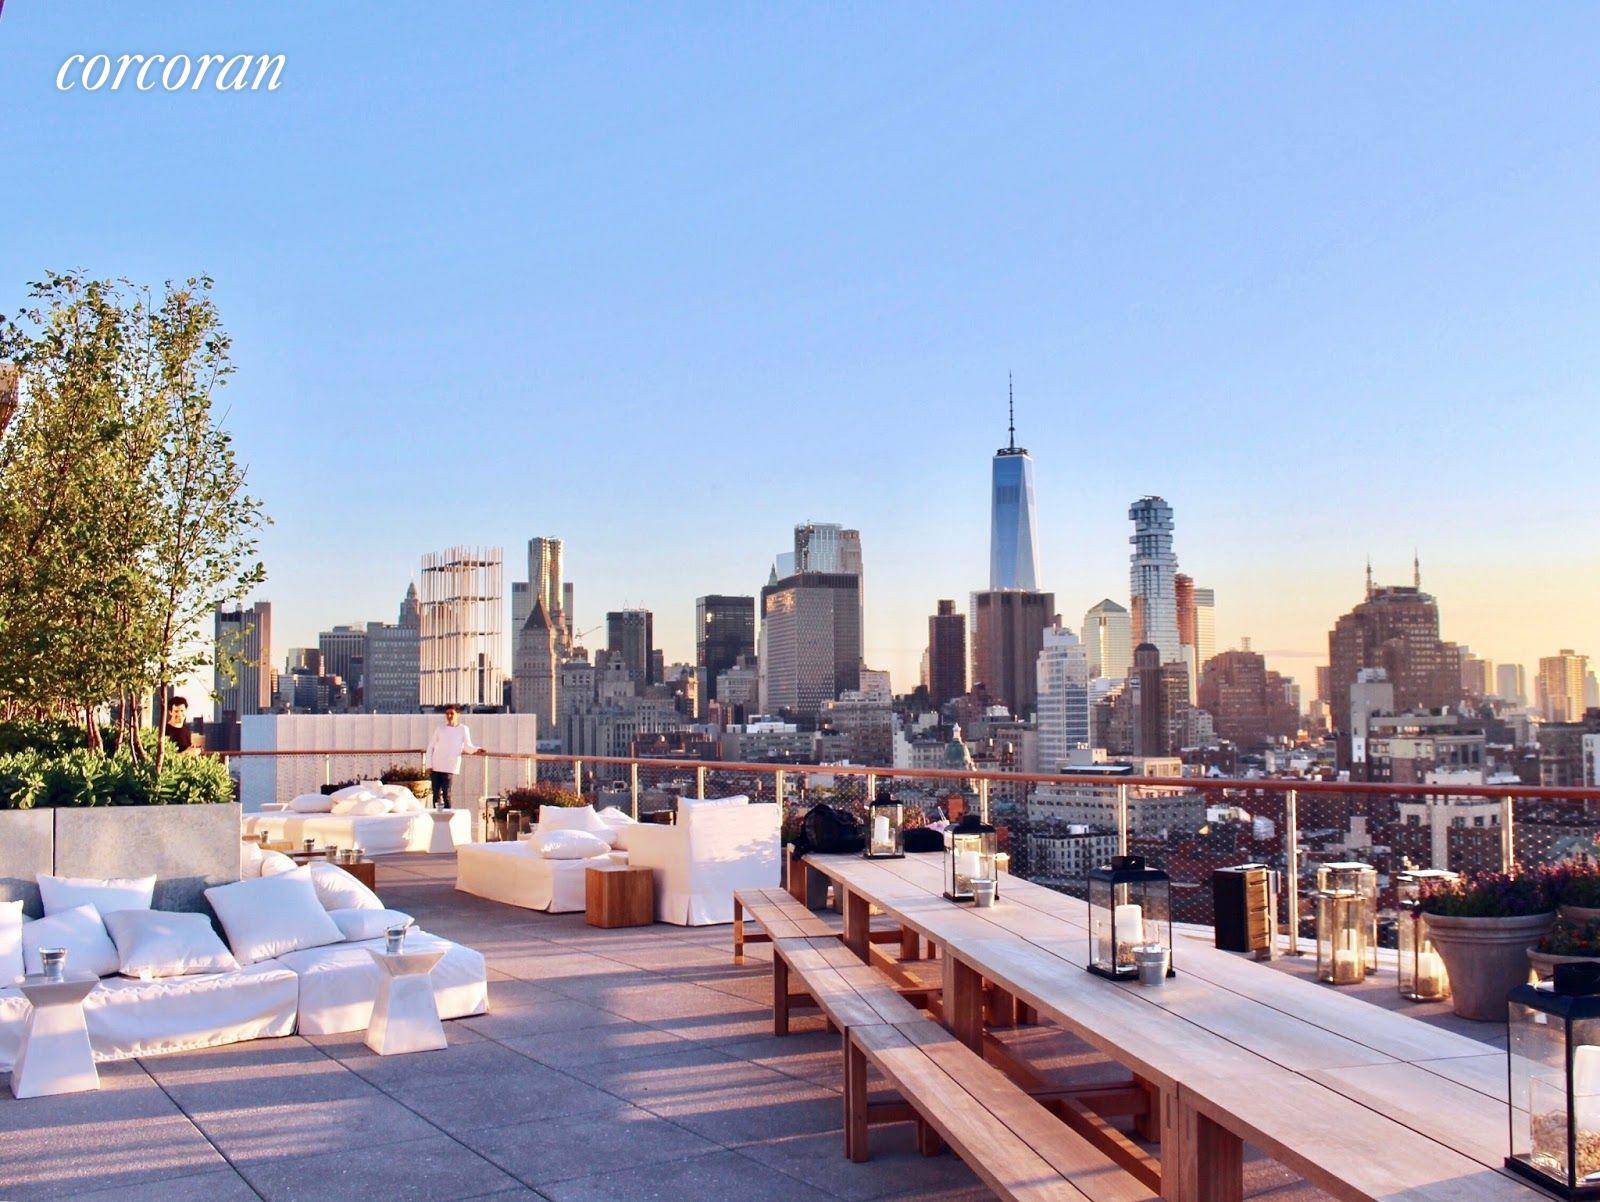 Rarely available is an oversized 1361sqft one bedroom condominium jewel in the sky with an astounding 270 degree panorama of Manhattan.